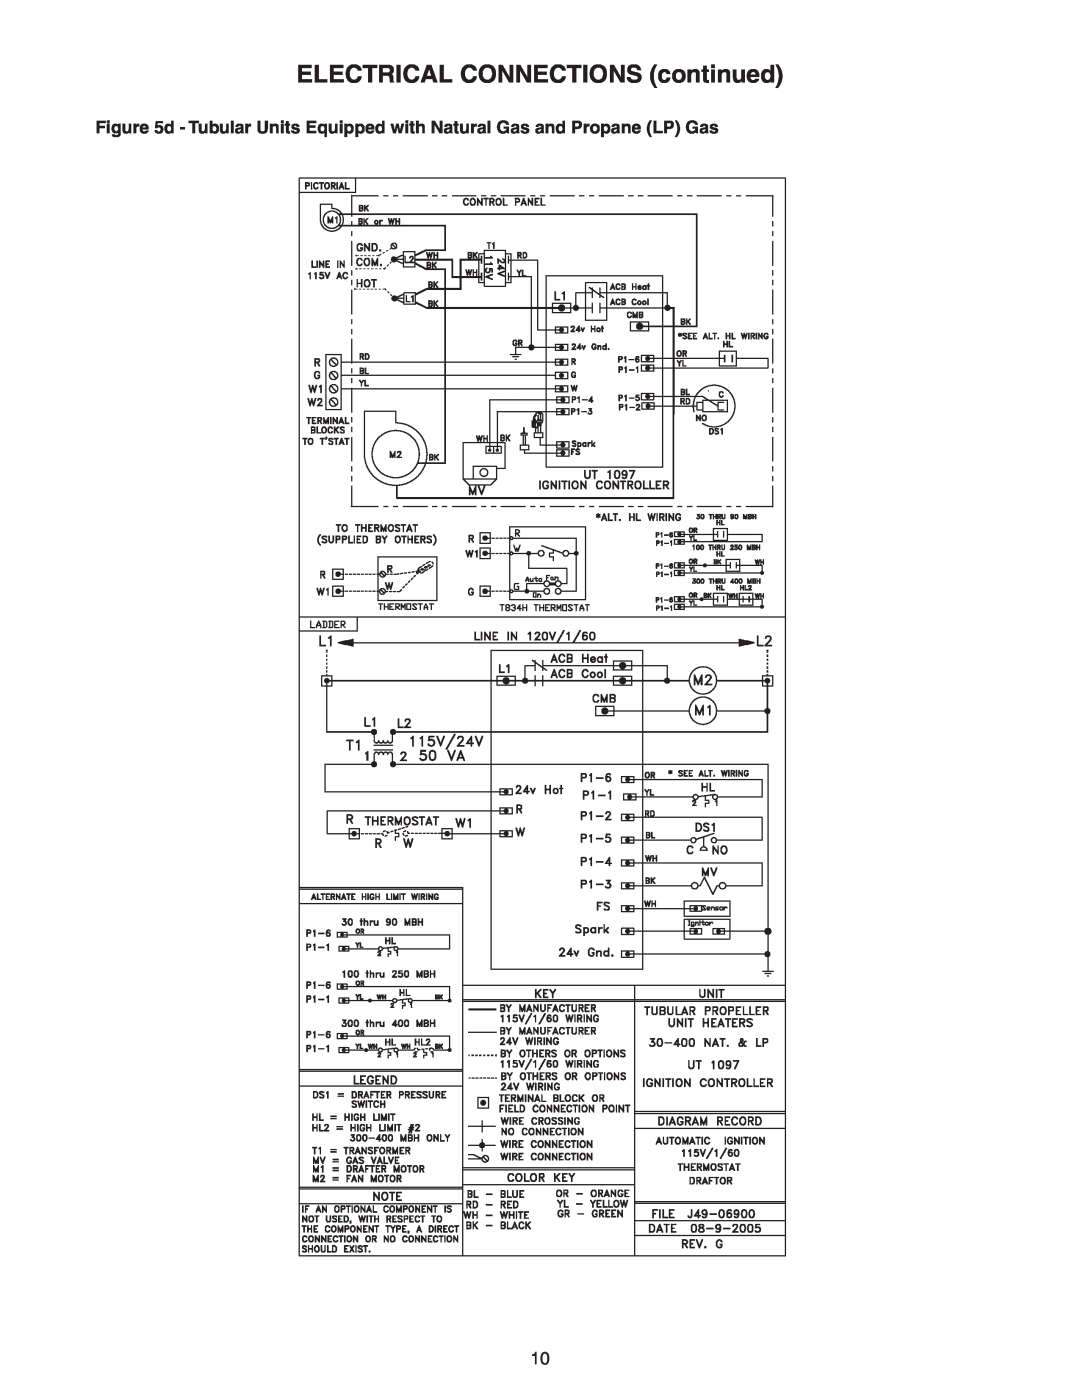 Sterling GF-150, TF-400, TF-150, TF-300, TF-200, TF-350, TF-175, TF-250, TF-125, GF-400, GF-250 ELECTRICAL CONNECTIONS continued 